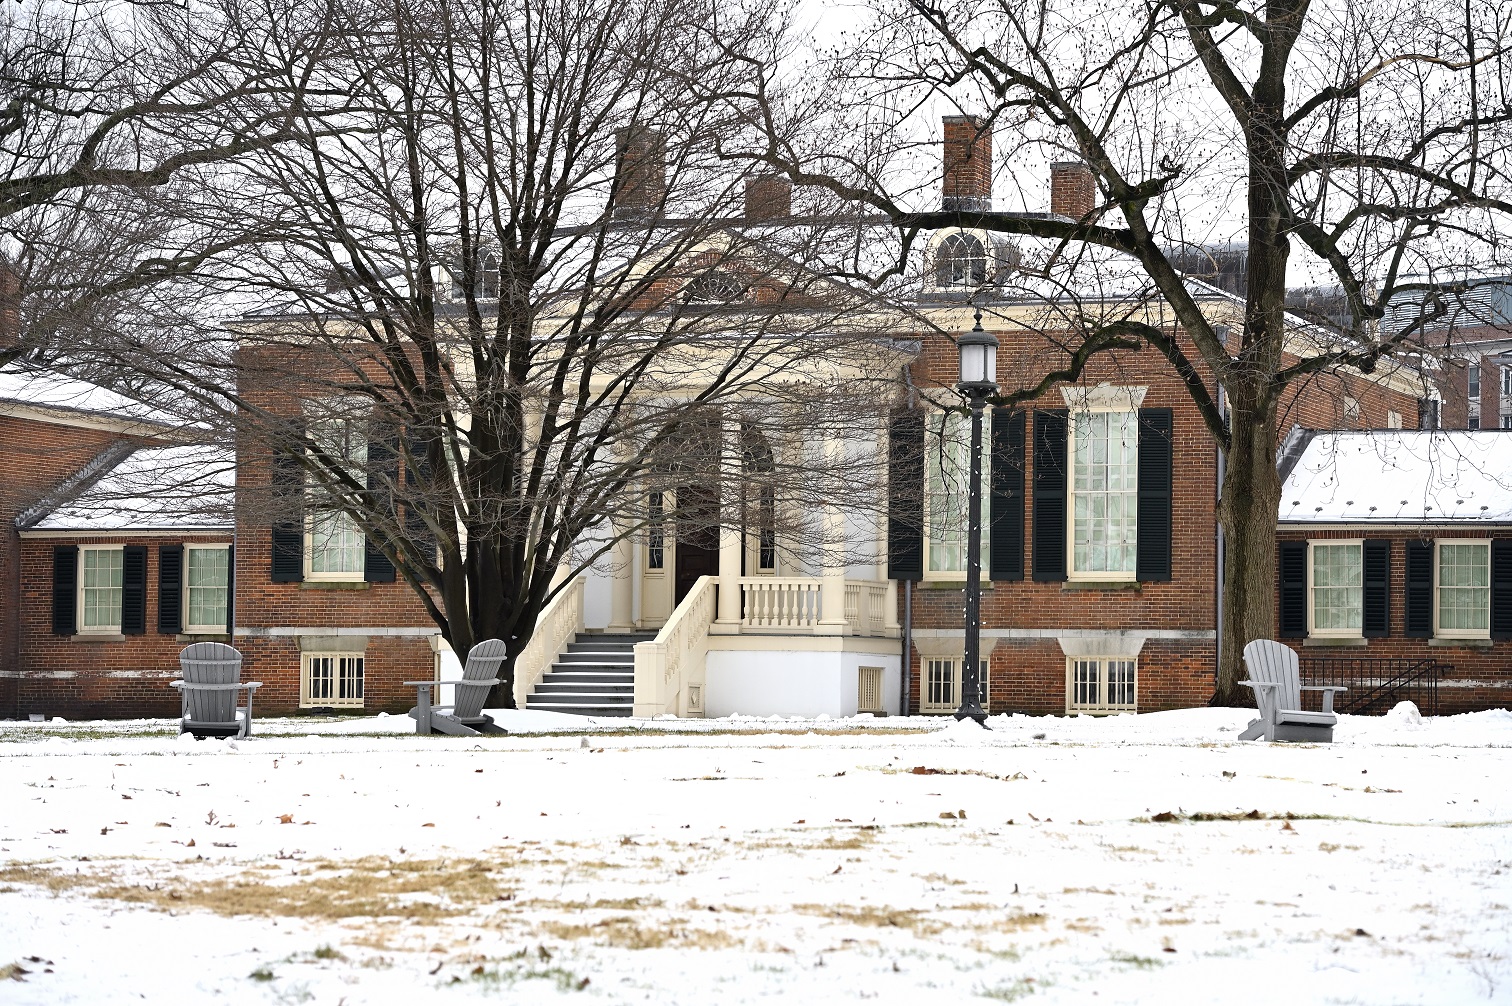 Homewood Museum's North facade in the snow.